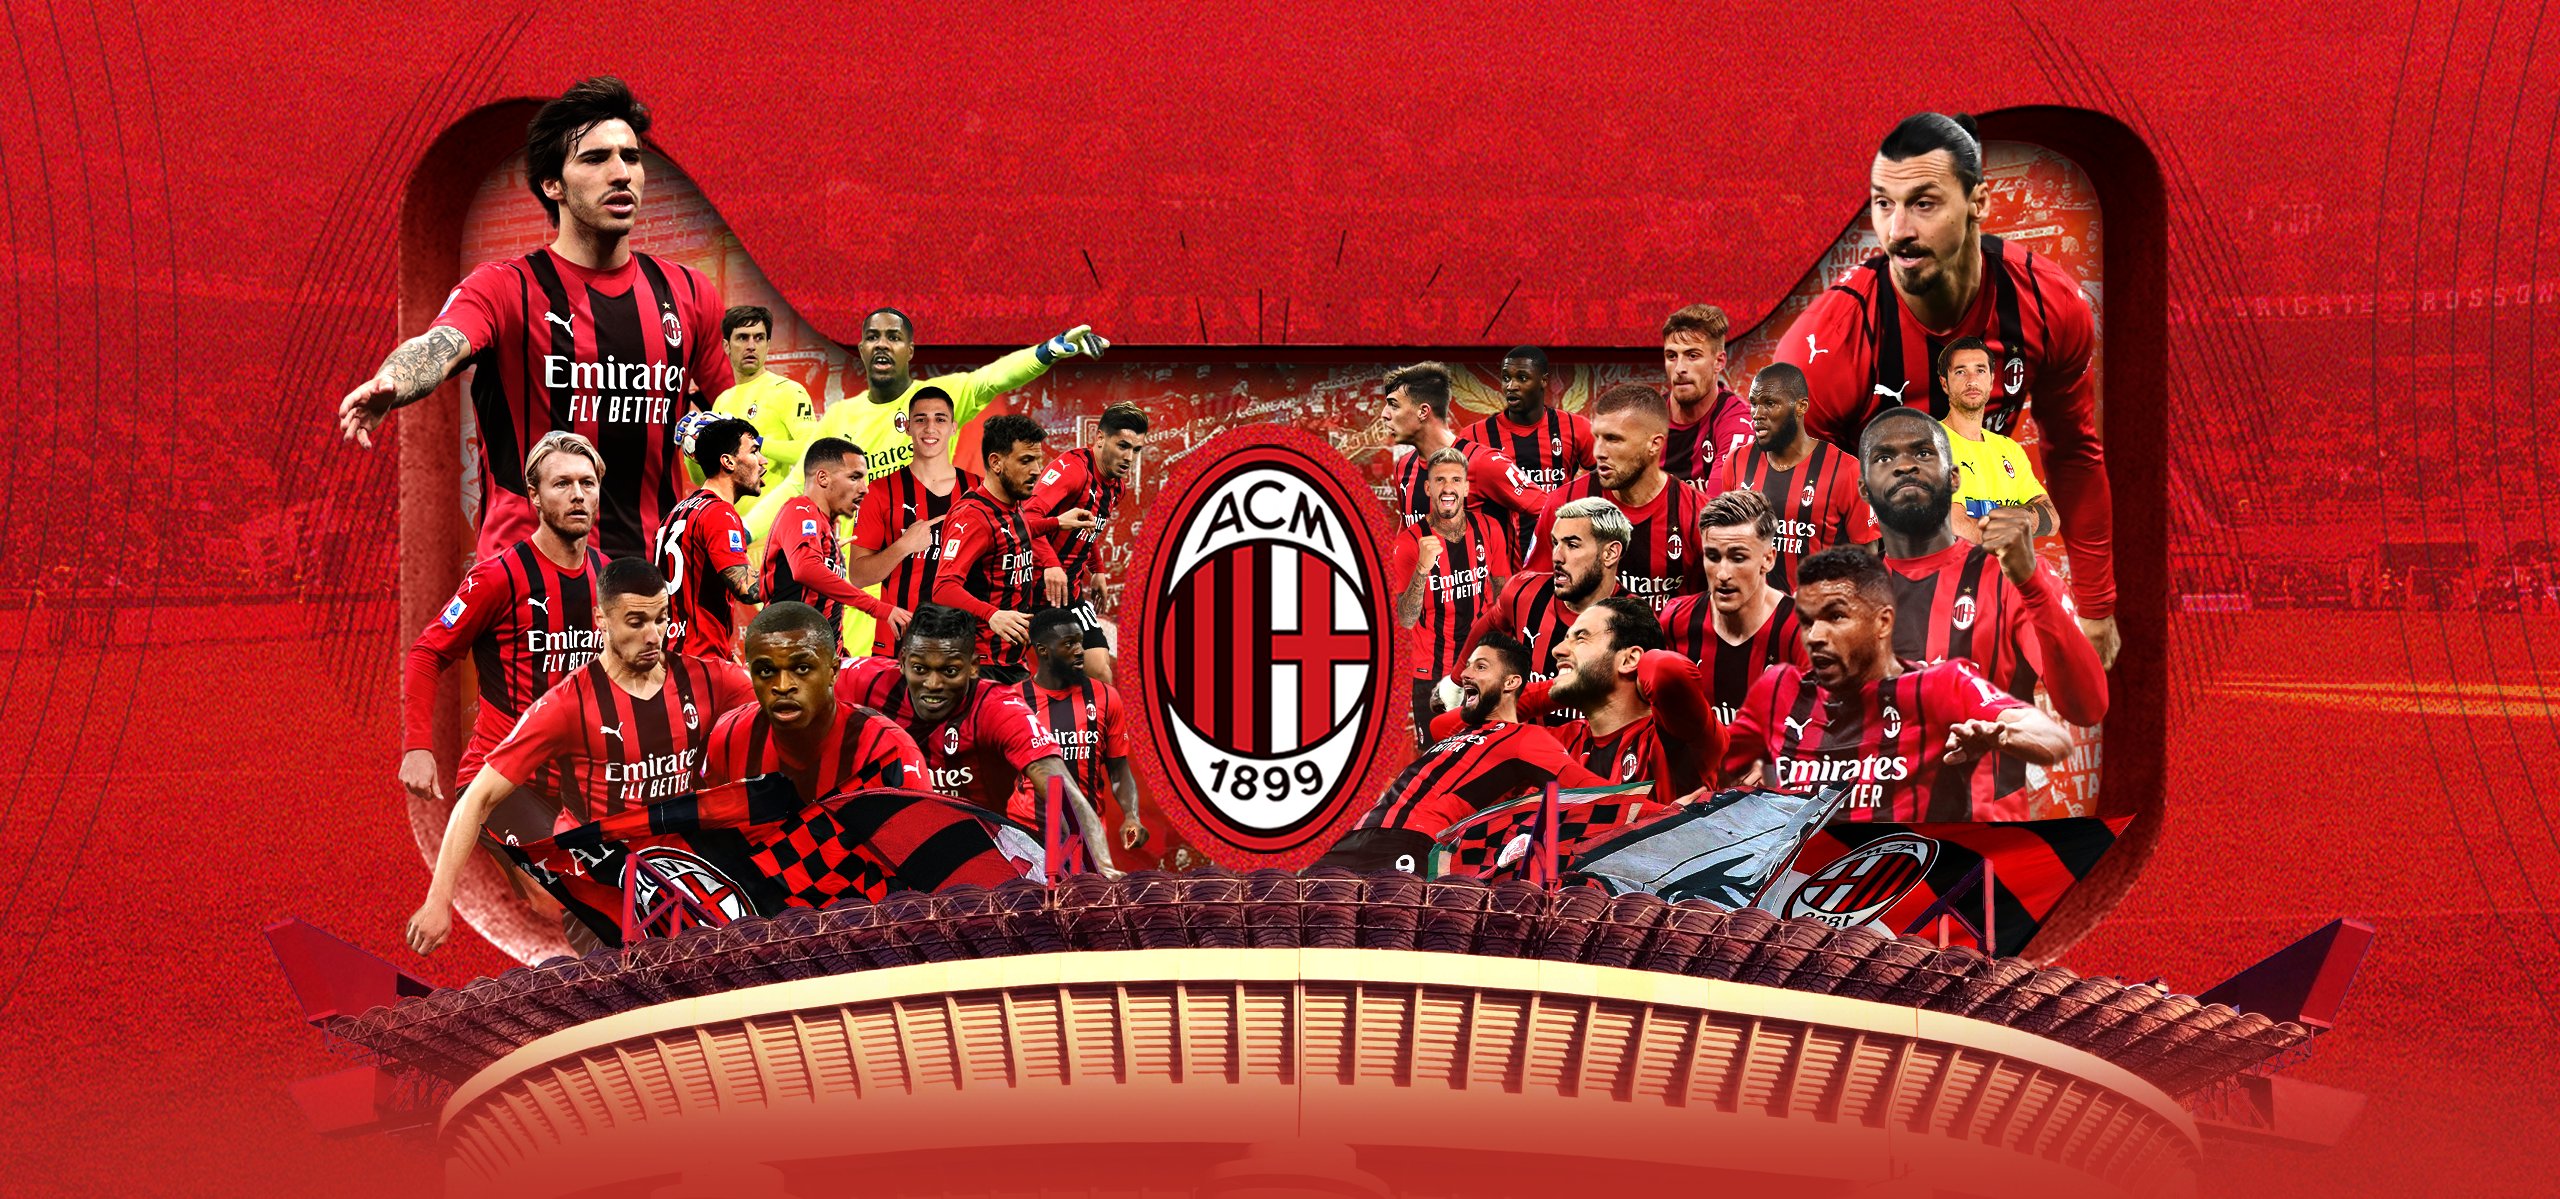 AC Milan launches an official flagship store on Tmall AC Milan